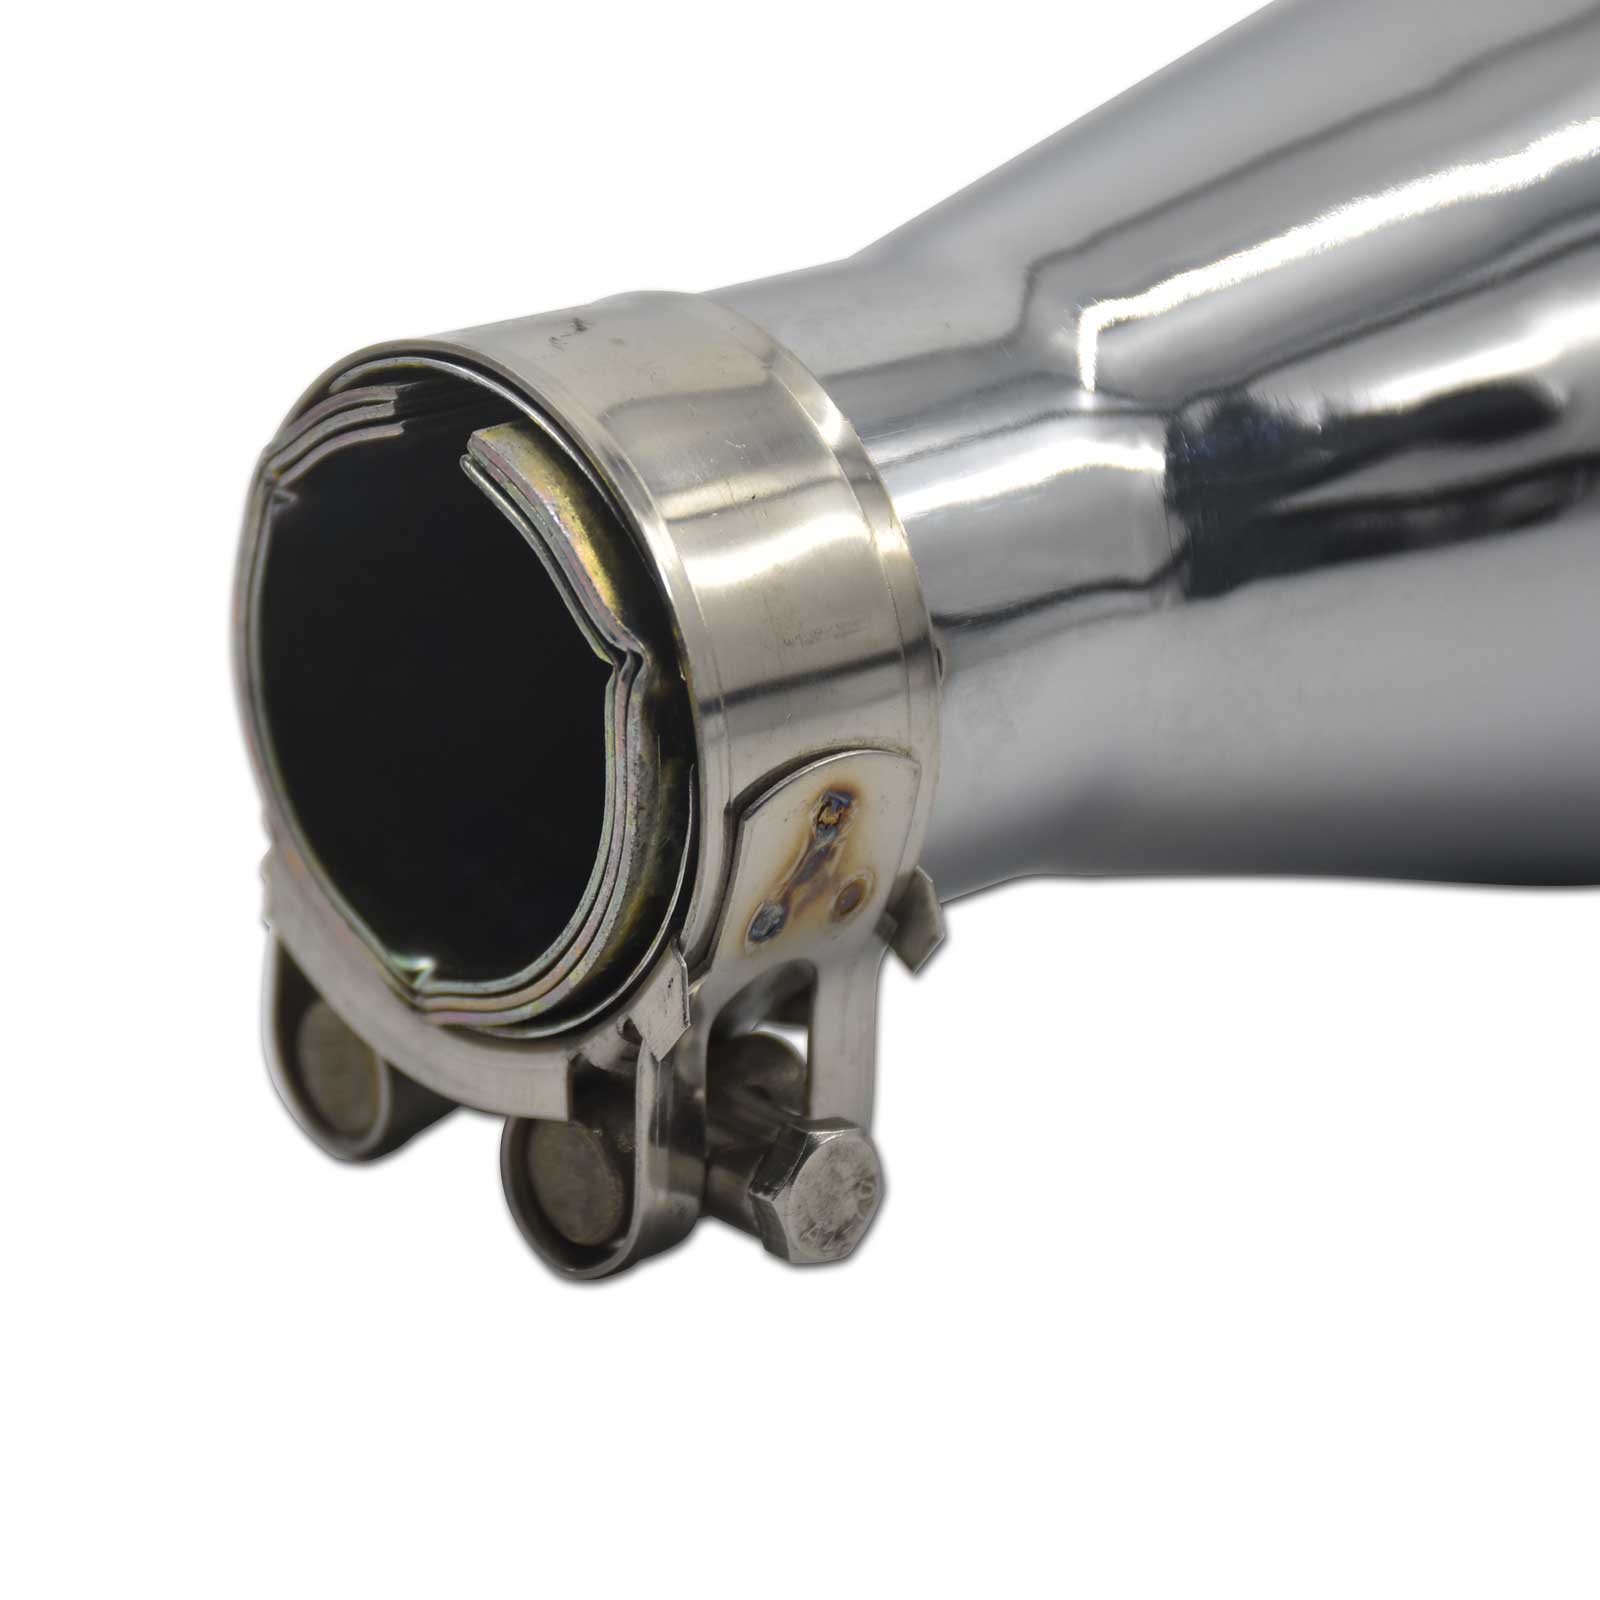 Vintage 38-45mm Exhaust Muffler With CNC Tail Pipe